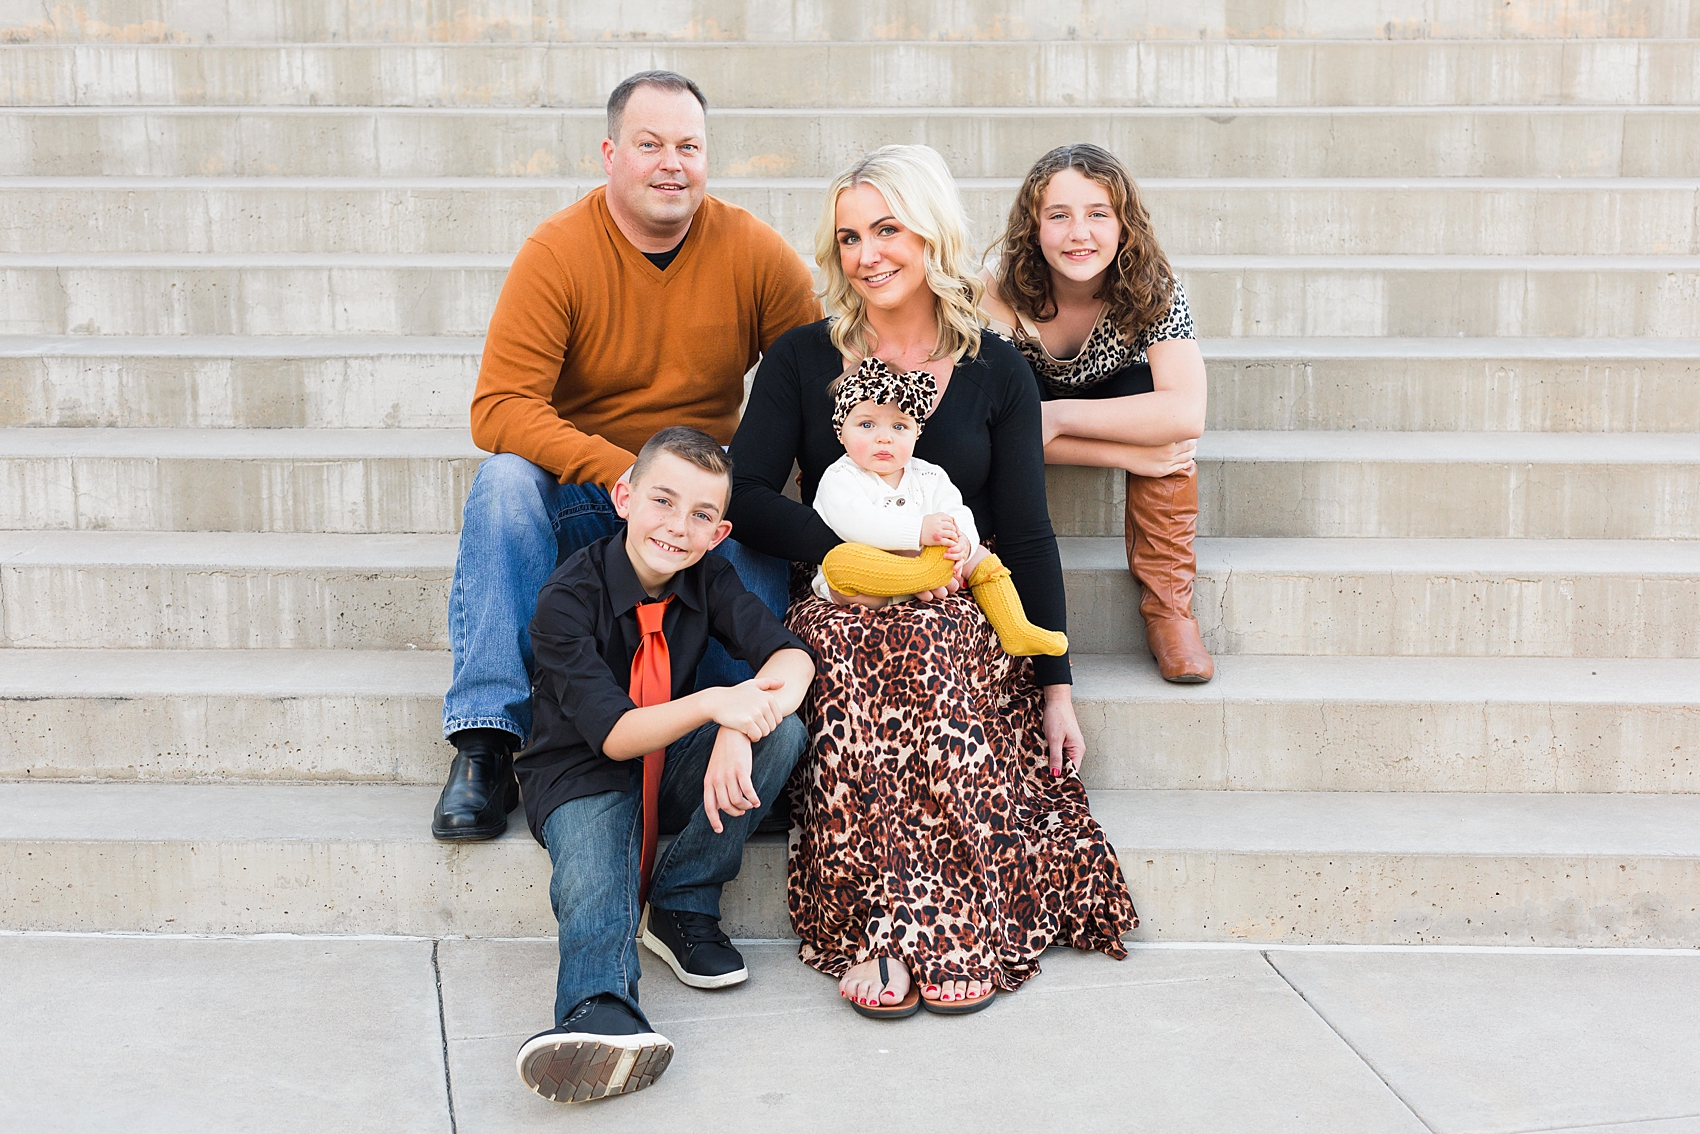 Leah Hope Photography | Downtown Phoenix Arizona | Arizona Science Center | Family Pictures | What to Wear | Family Poses | Solid Gray Background